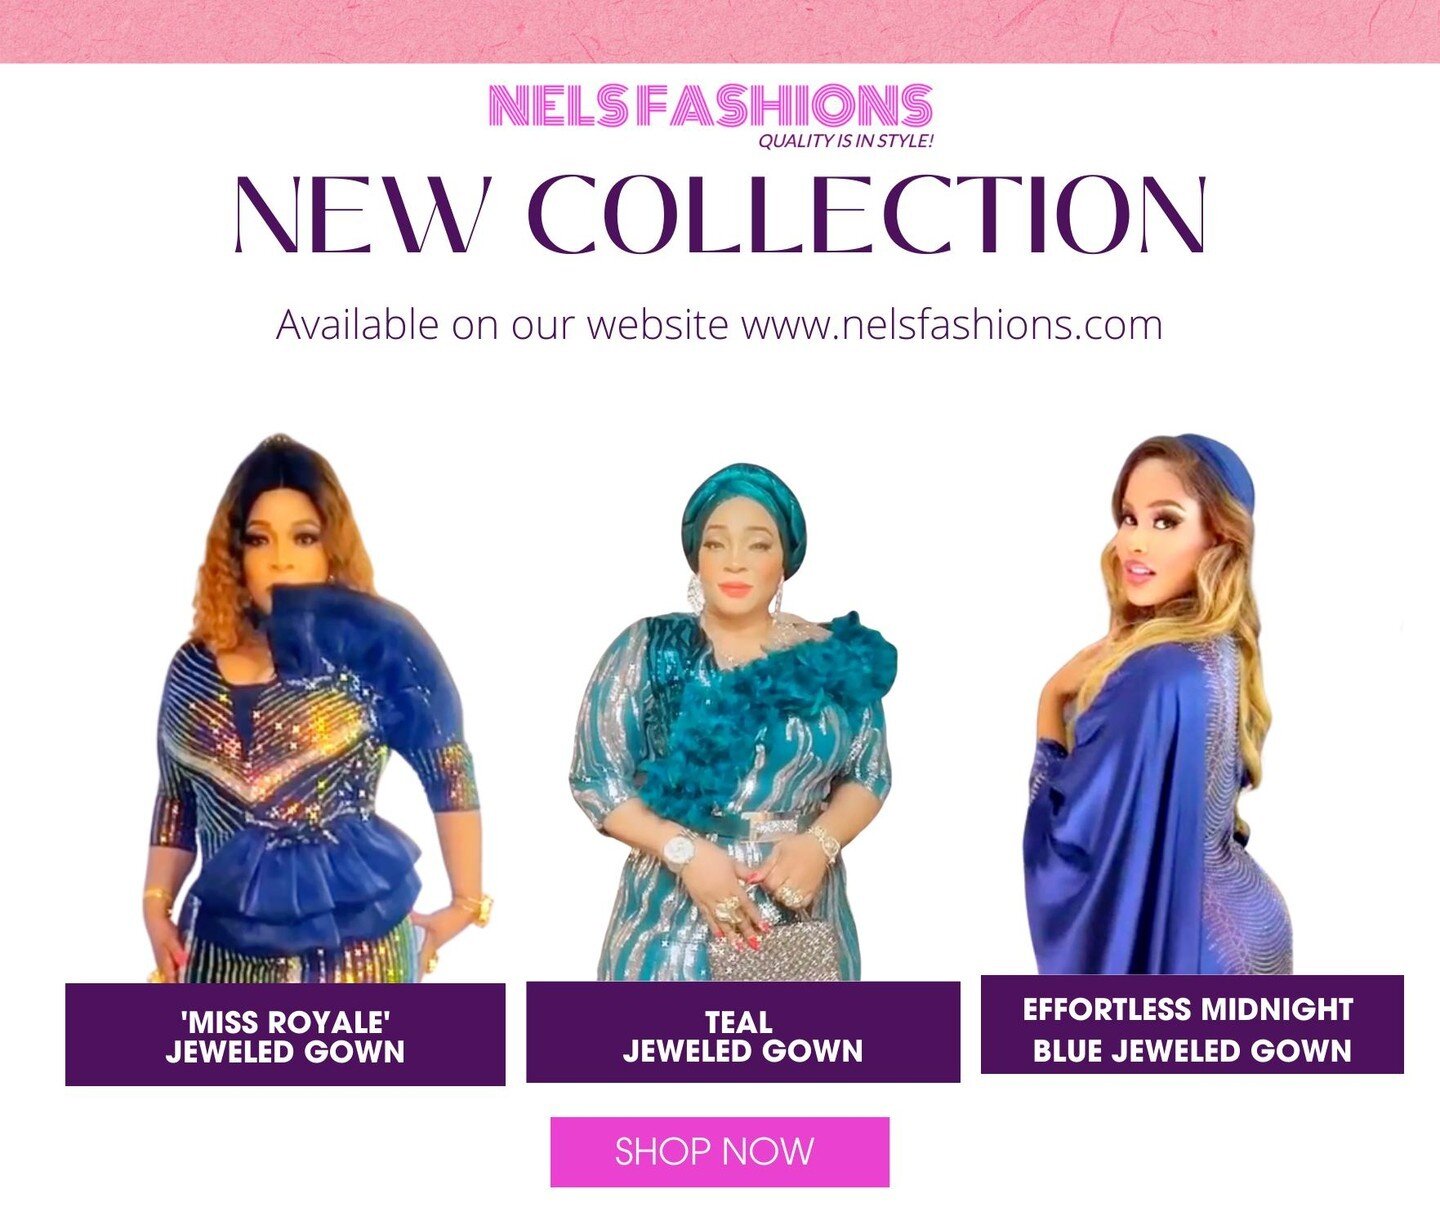 ✨ Dazzle in Elegance ✨ Introducing the breathtaking new collection of NELS Fashions Jeweled Gowns! 💎💃 Prepare to be captivated by the glamour and grace of these exquisite creations! 🌟💕

💫 From red carpet events to enchanting evenings, these gown